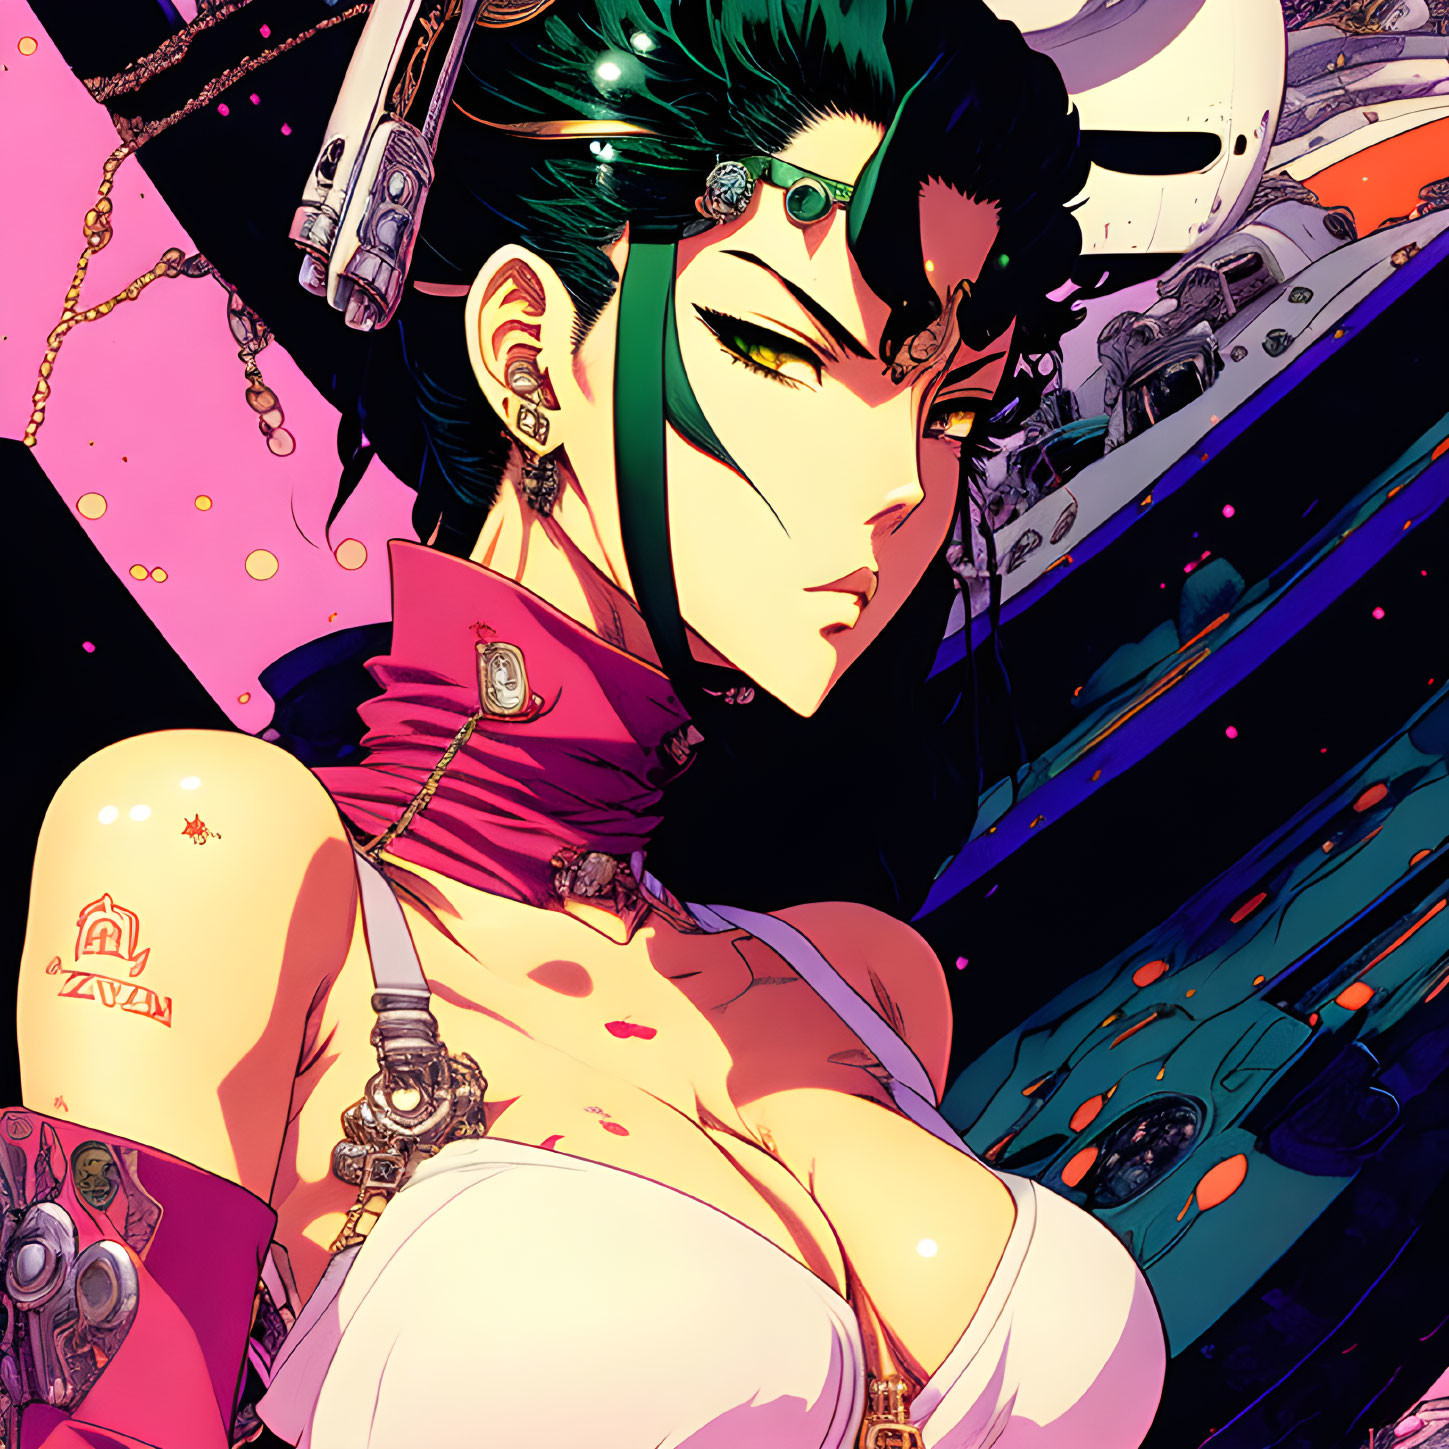 Vibrant anime illustration: female character with green hair in futuristic outfit on cosmic backdrop.